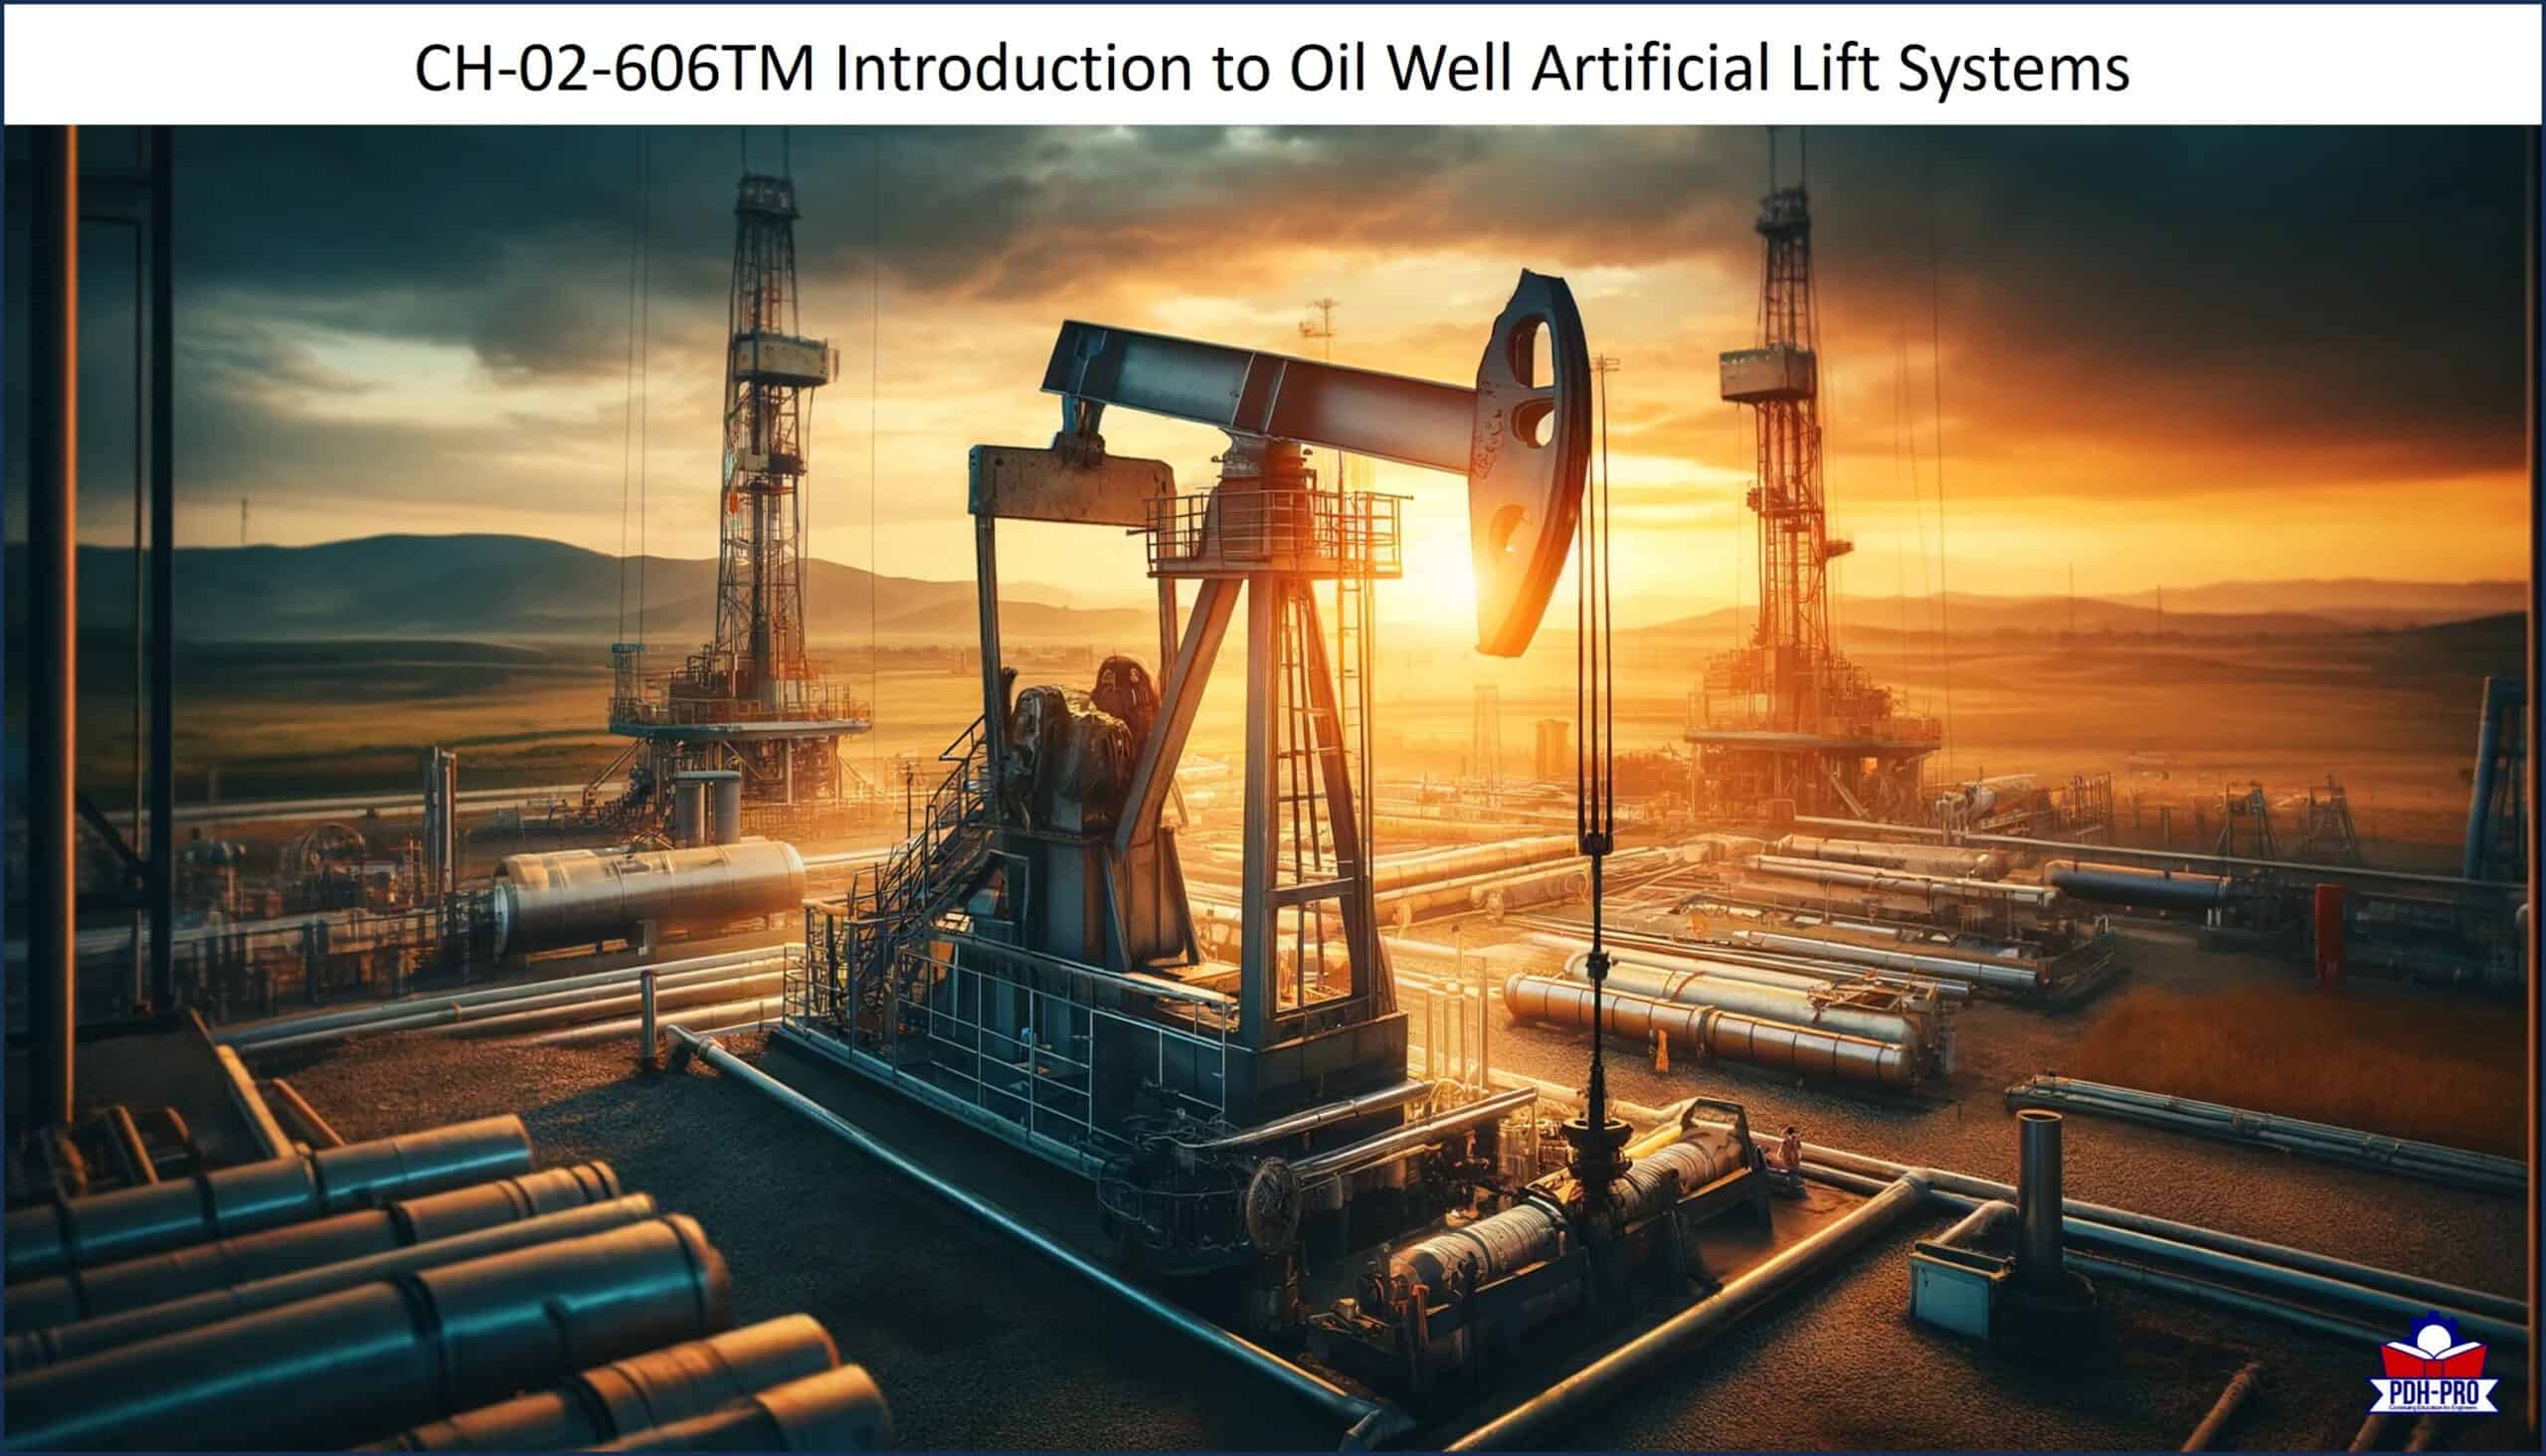 Recorded Webinar – Introduction to Oil Well Artificial Lift Systems